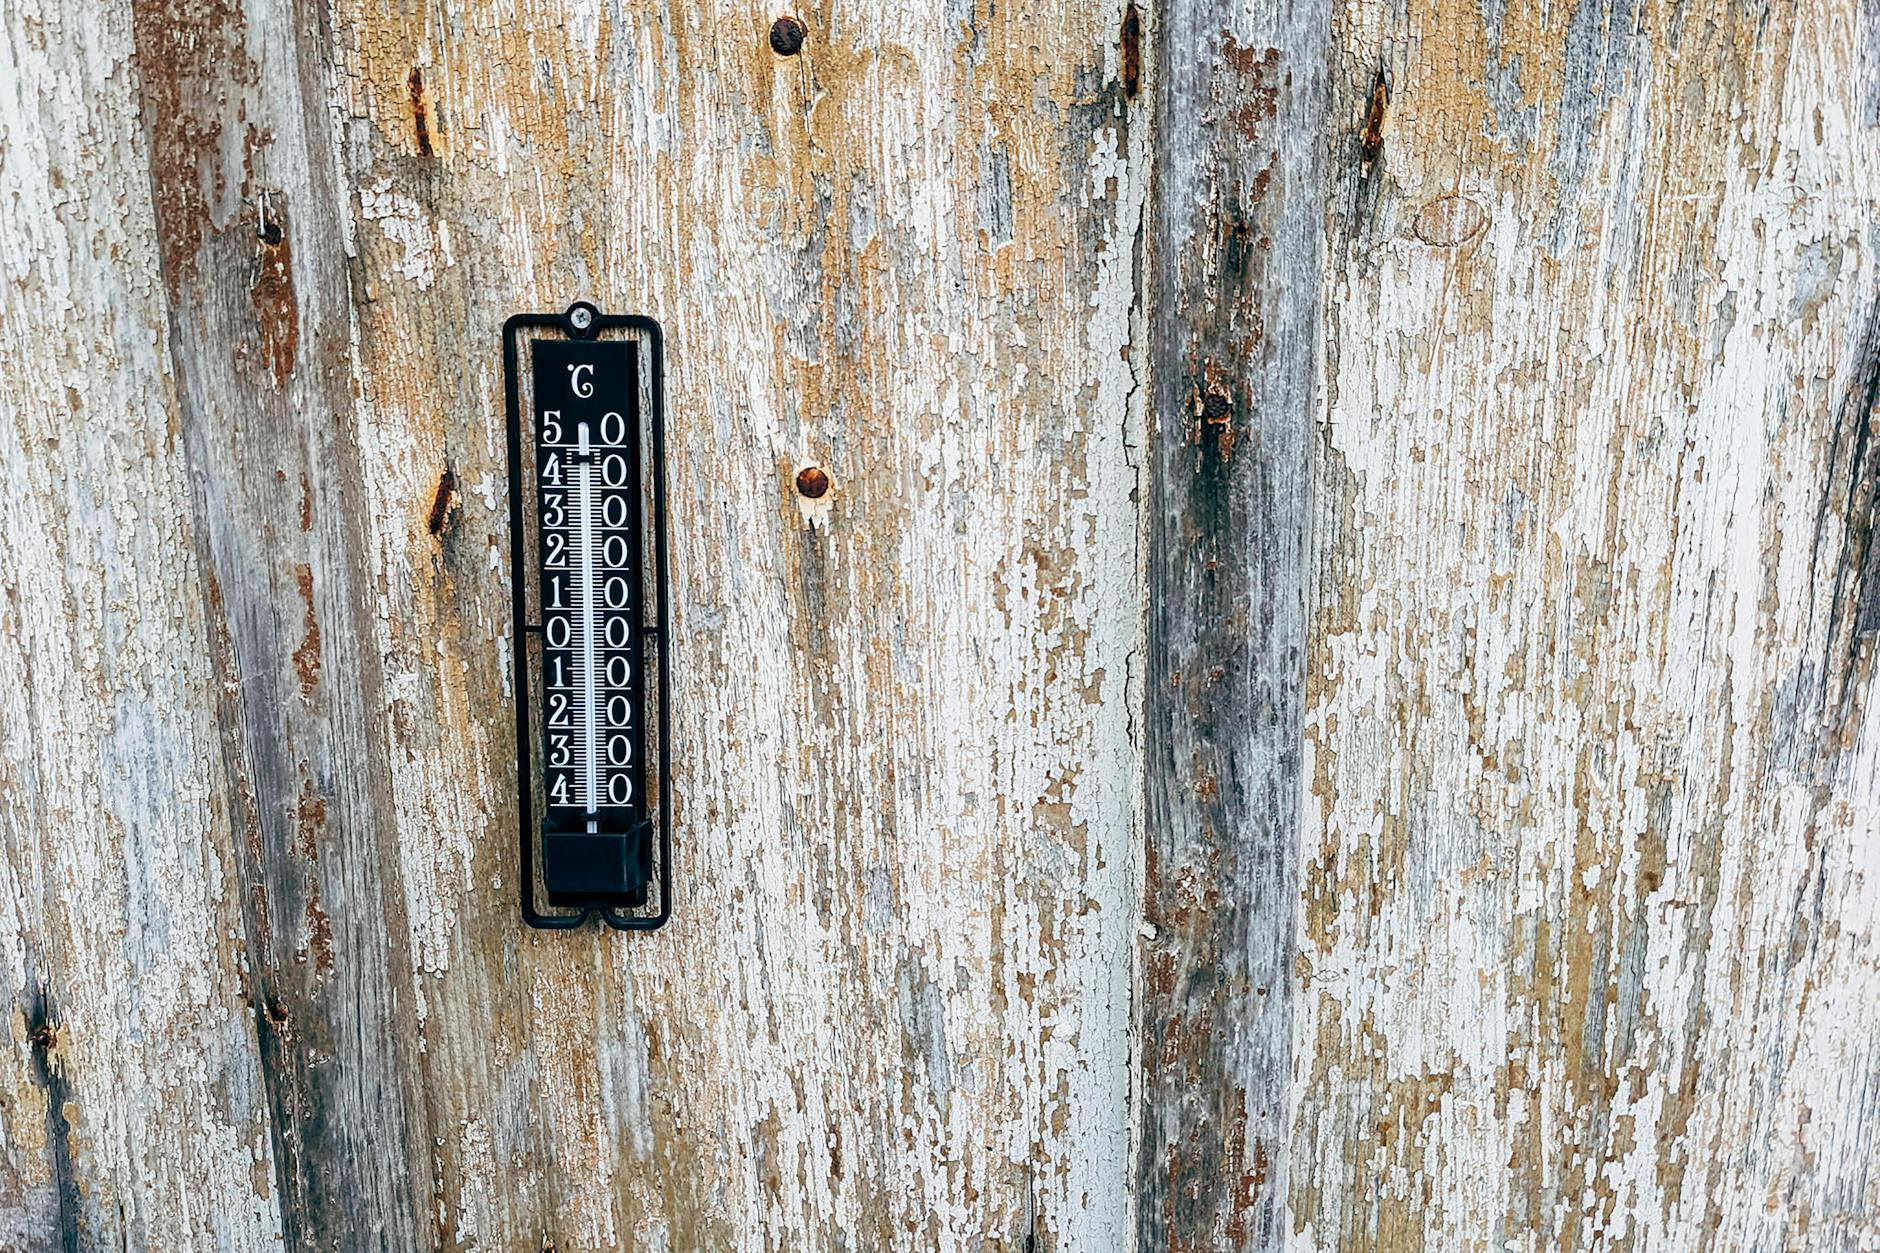 A thermometer on a wooden wall